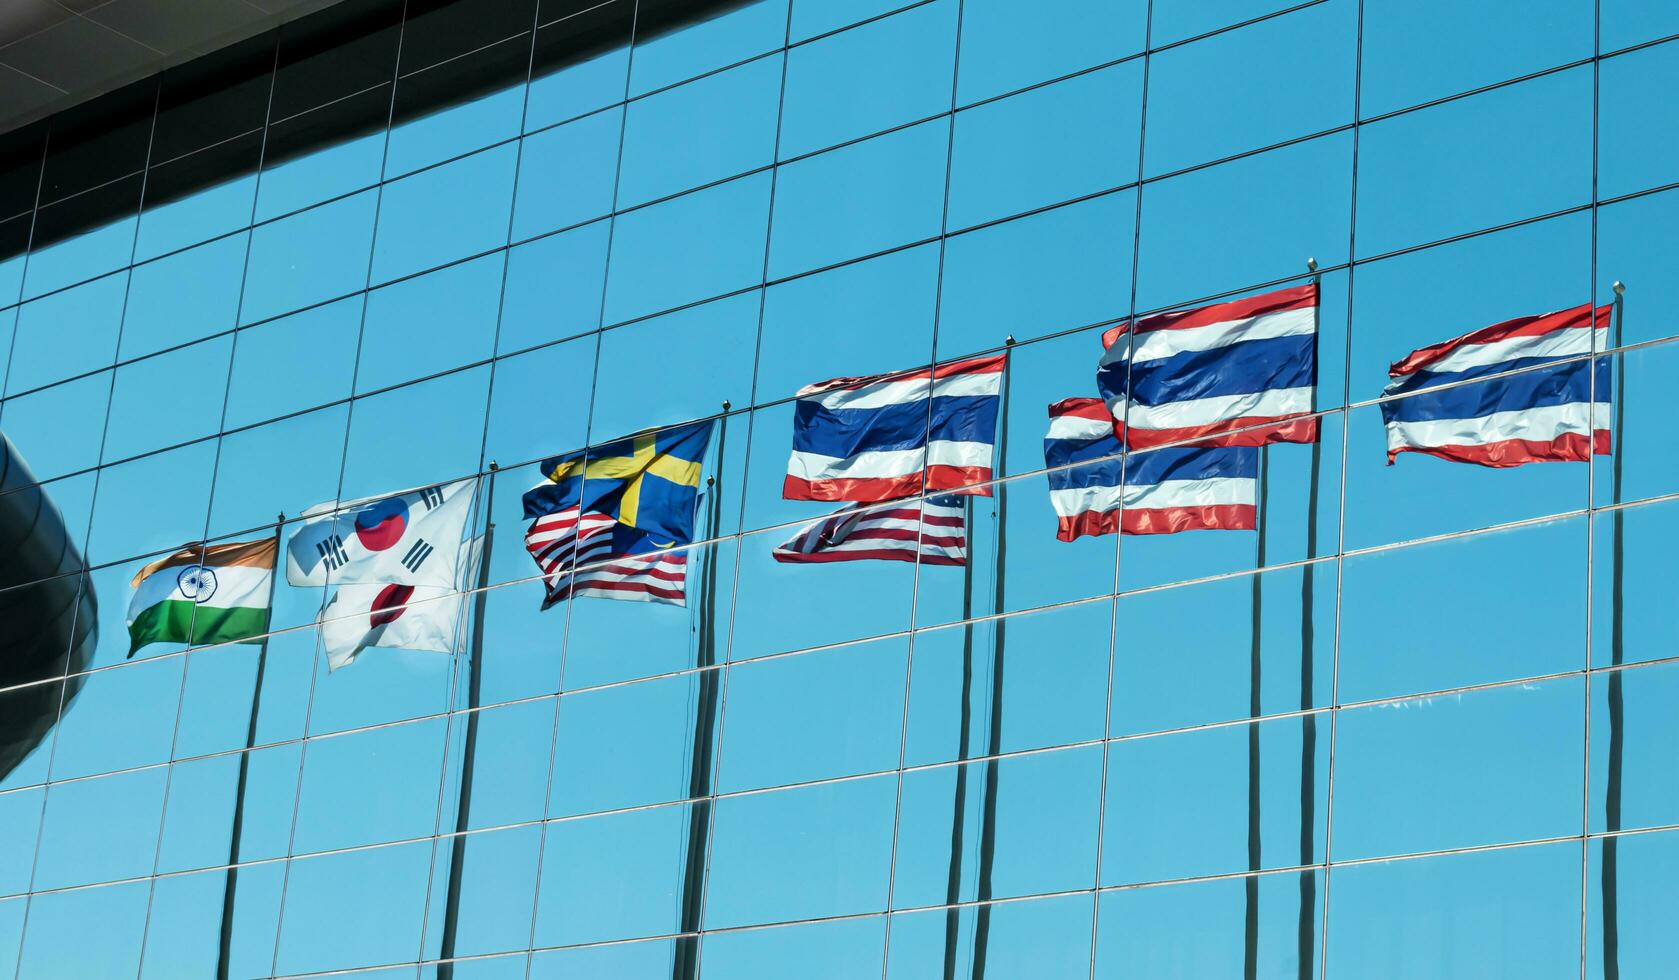 India South Korea Japan Malaysia Sweden America and Thailand flag pole reflection on mirror of building photo